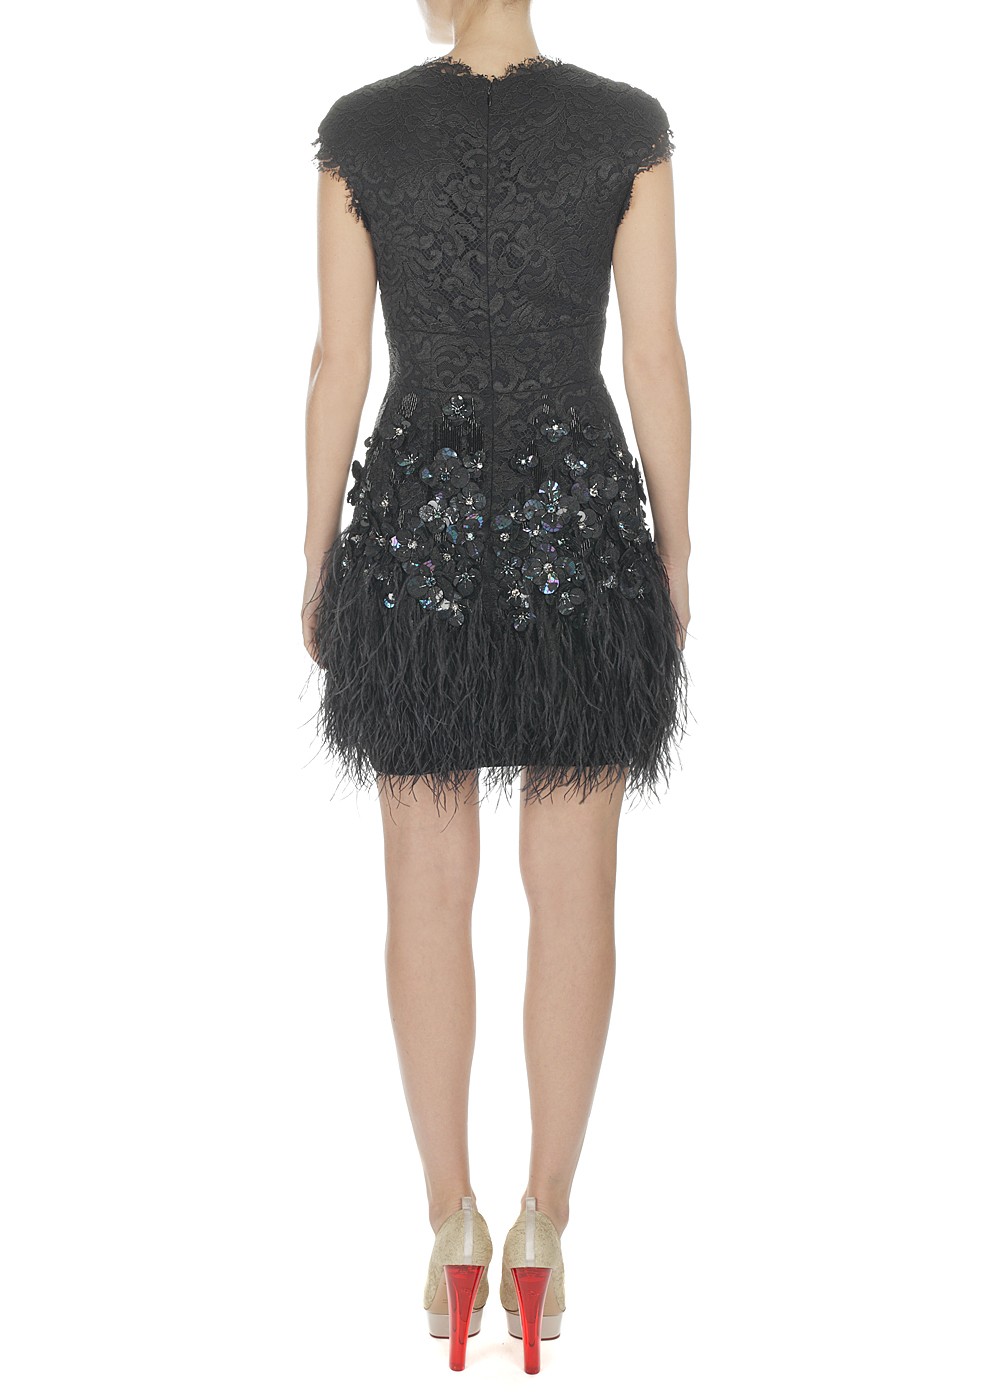 Matthew williamson Lacquer Lace Feathered Dress in Black | Lyst